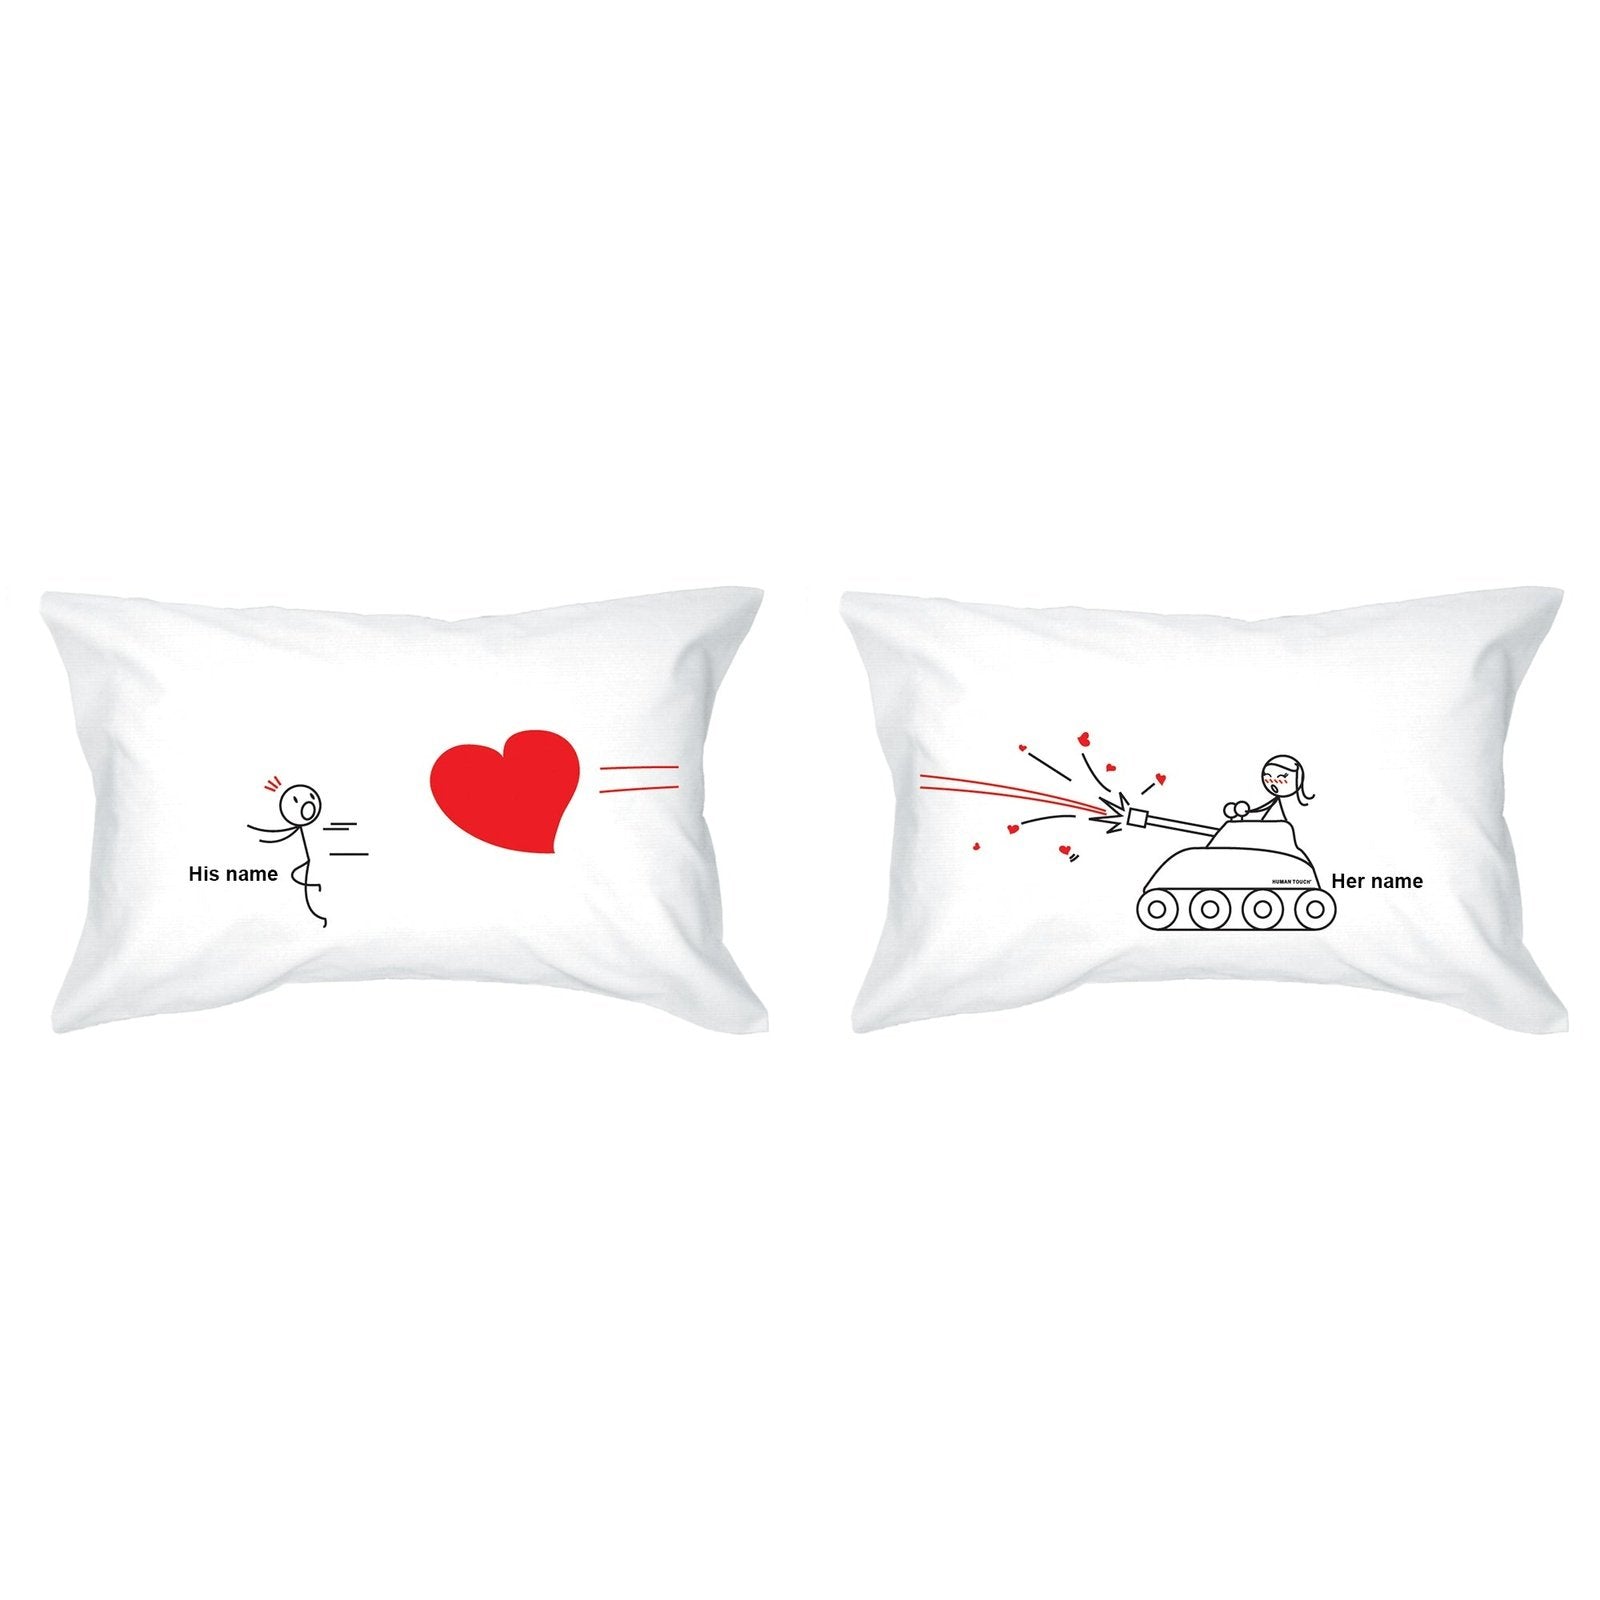 Be ready, my heart went BOOM!Home & GardenHuman Touch OfficialBe ready to make the first move and let your heart go BOOM! With these cute "The Tank" Human Touch couple pillowcases, you can show someone special just how you feel